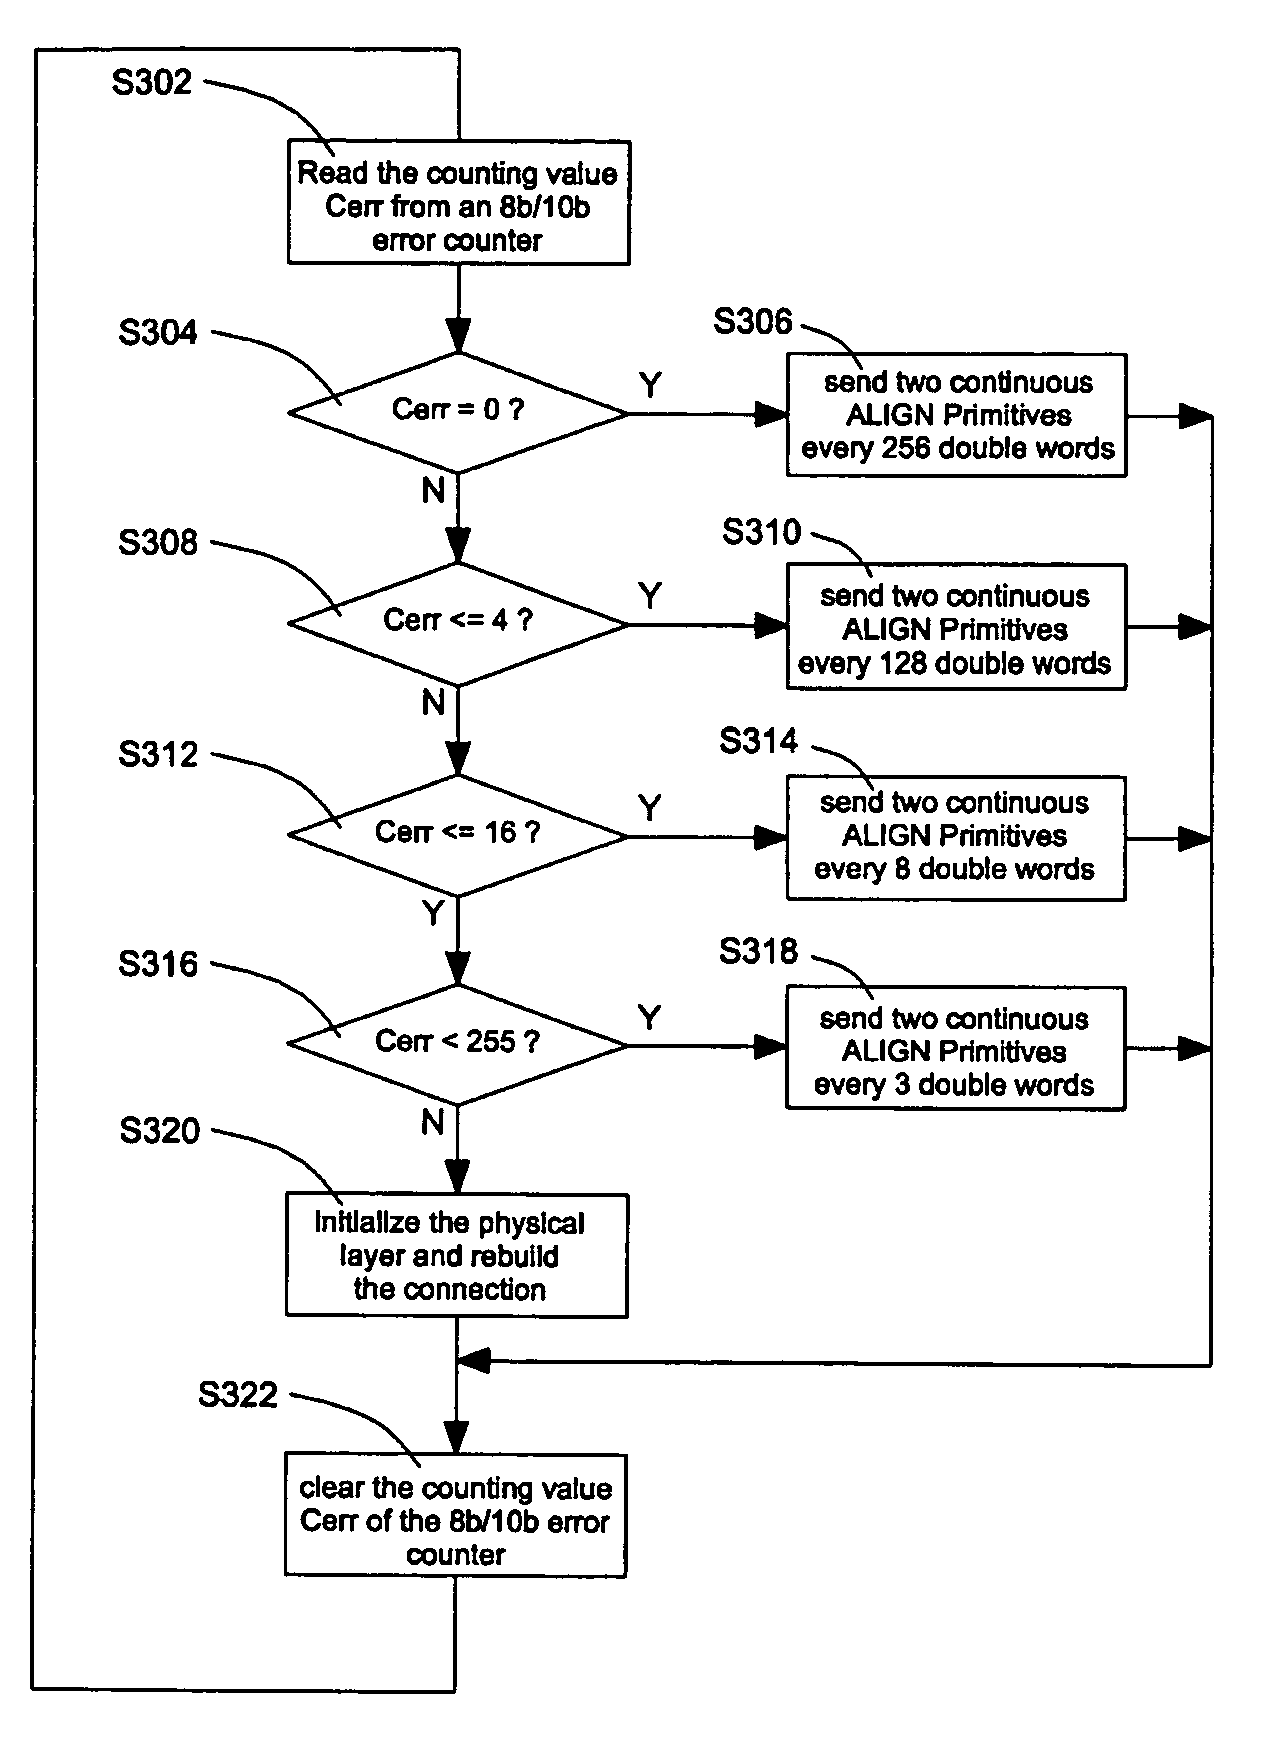 Method and circuit for reducing SATA transmission data errors by adjusting the period of sending ALIGN primitives